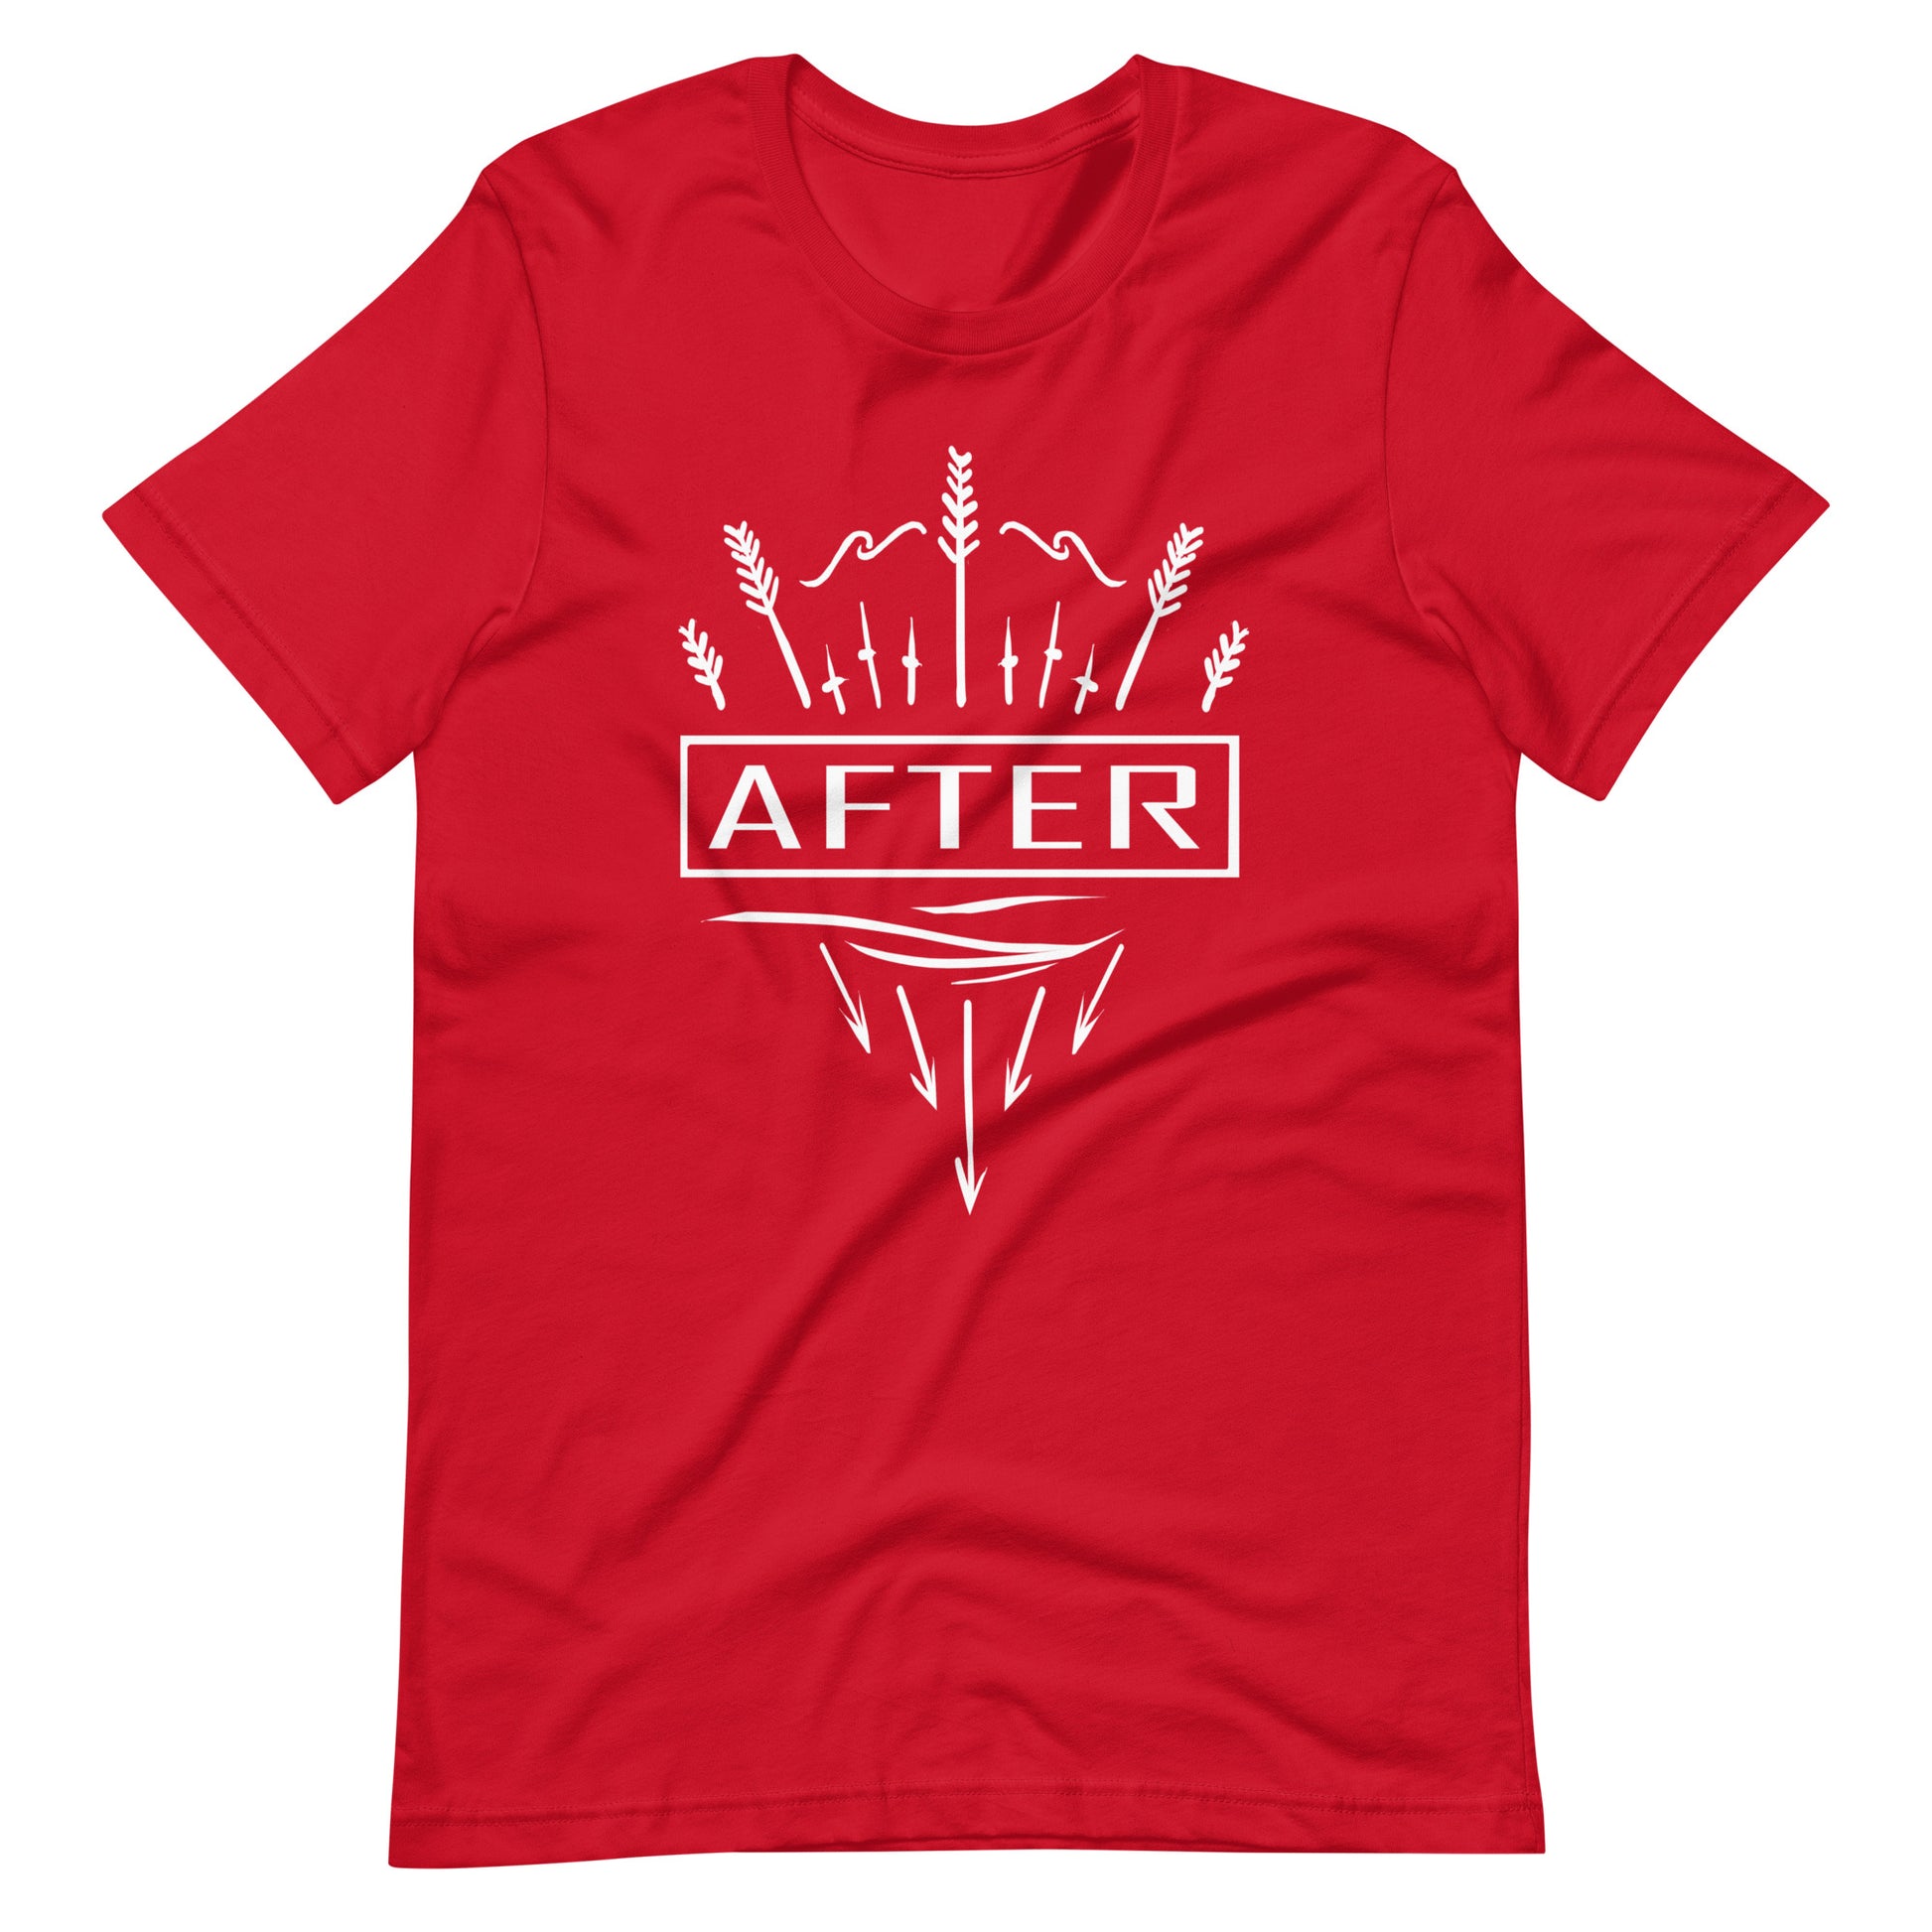 After - Men's t-shirt - Red Front